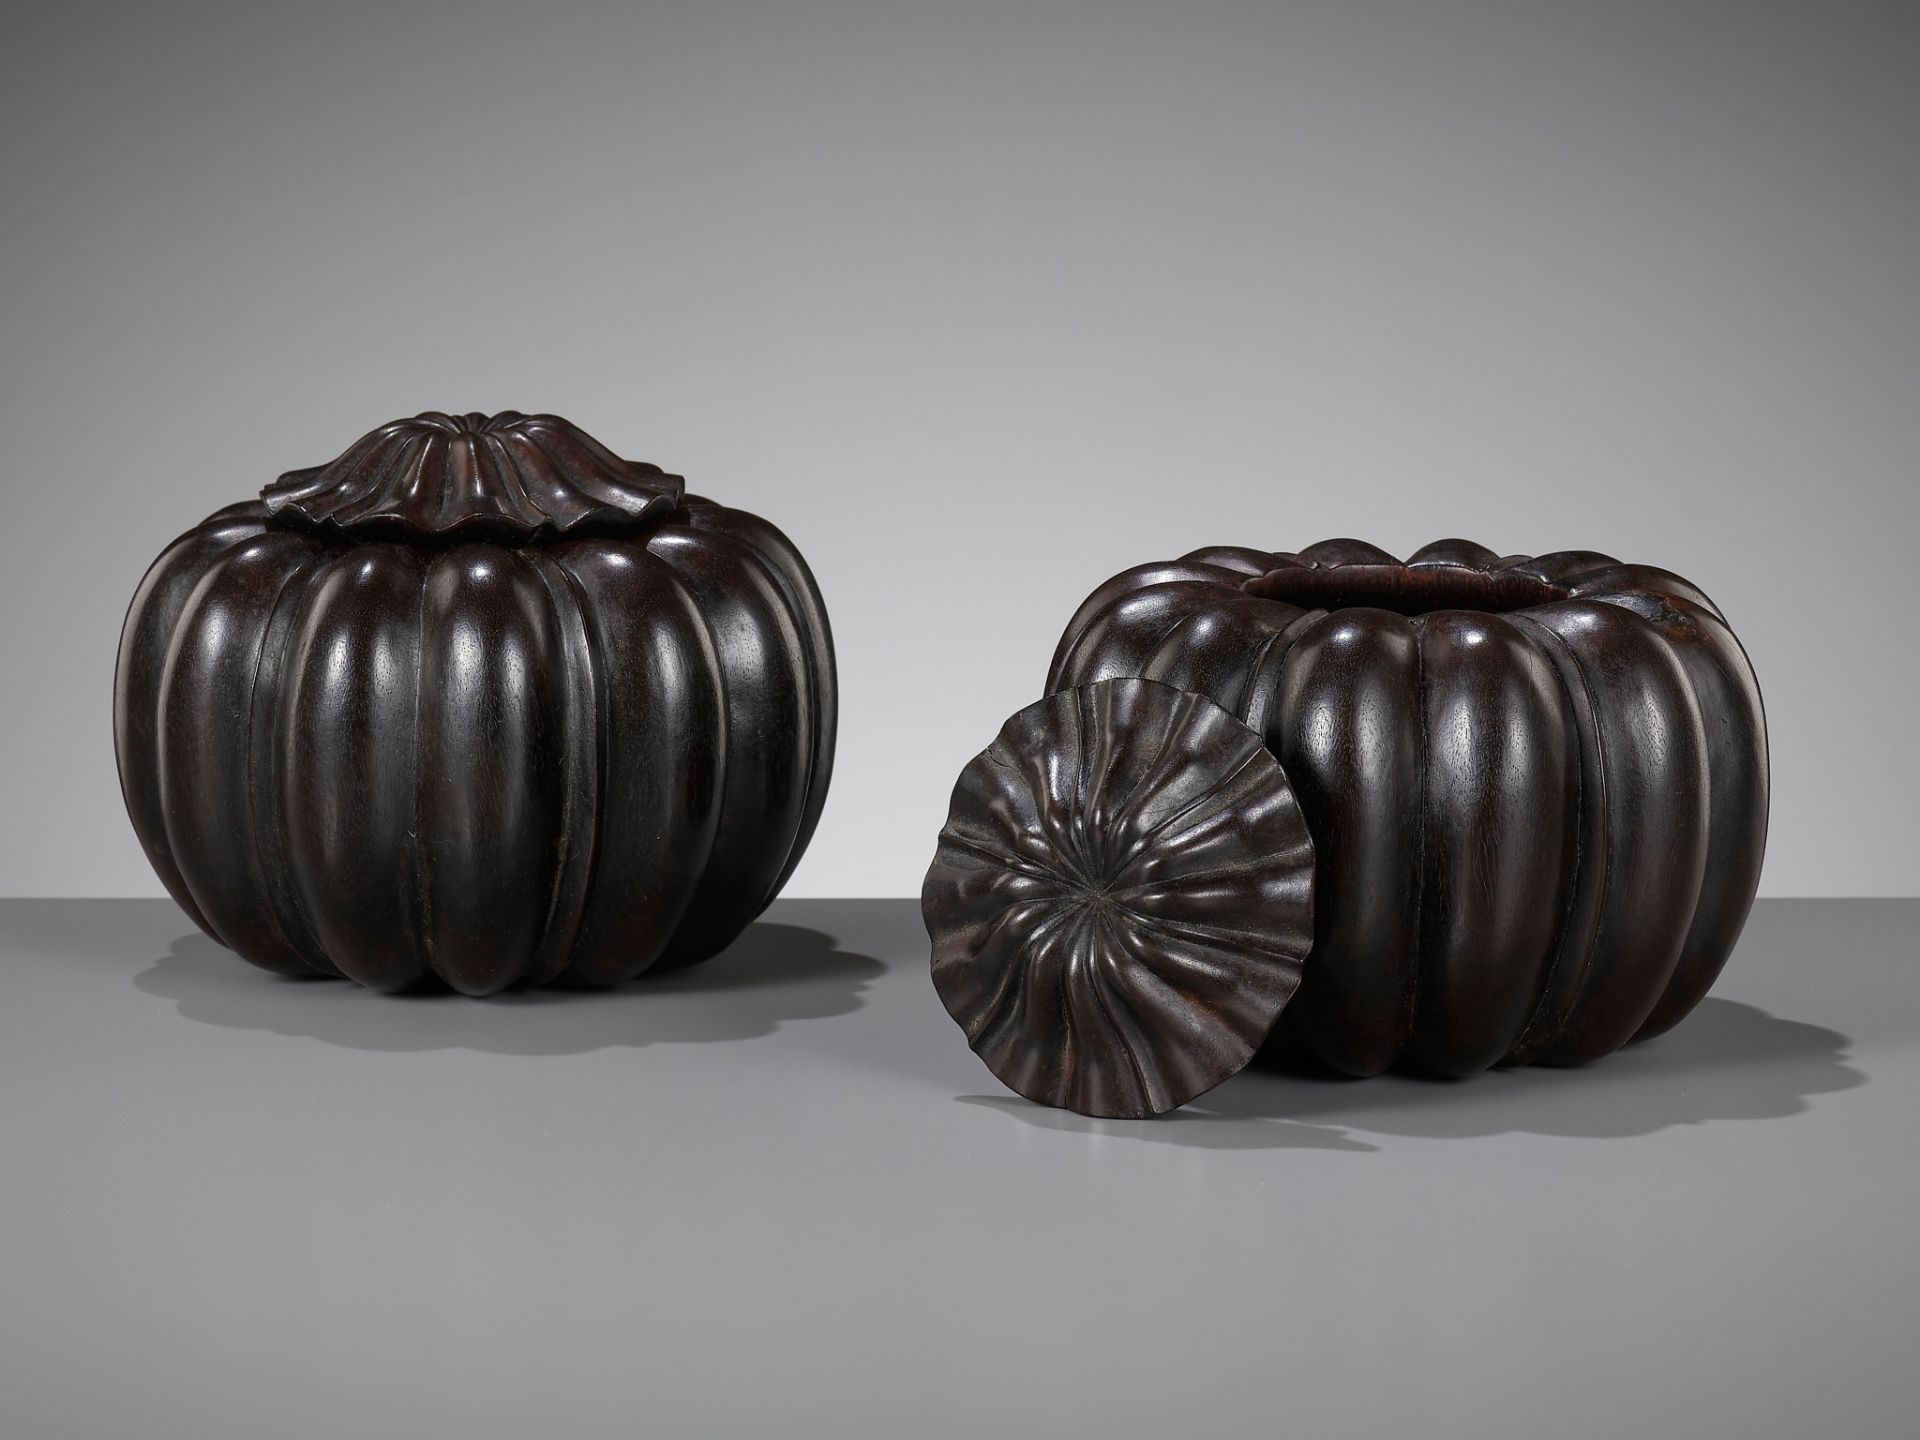 A PAIR OF ZITAN WEIQI COUNTER CONTAINERS, WEIQIZIHE, 17TH-18TH CENTURY